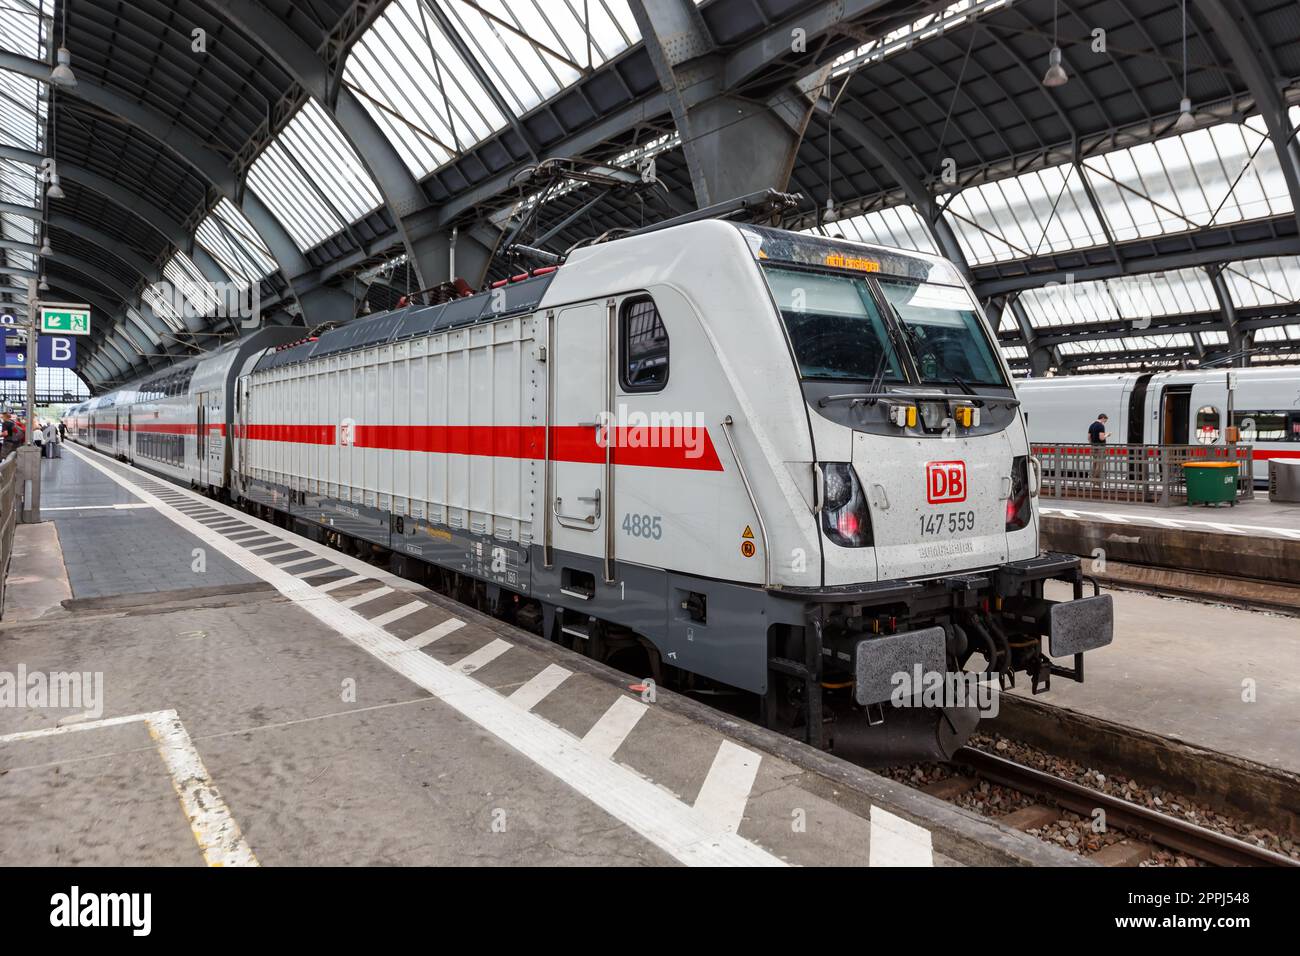 InterCity IC train type Twindexx Vario by Bombardier of DB Deutsche Bahn at Karlsruhe main station in Germany Stock Photo